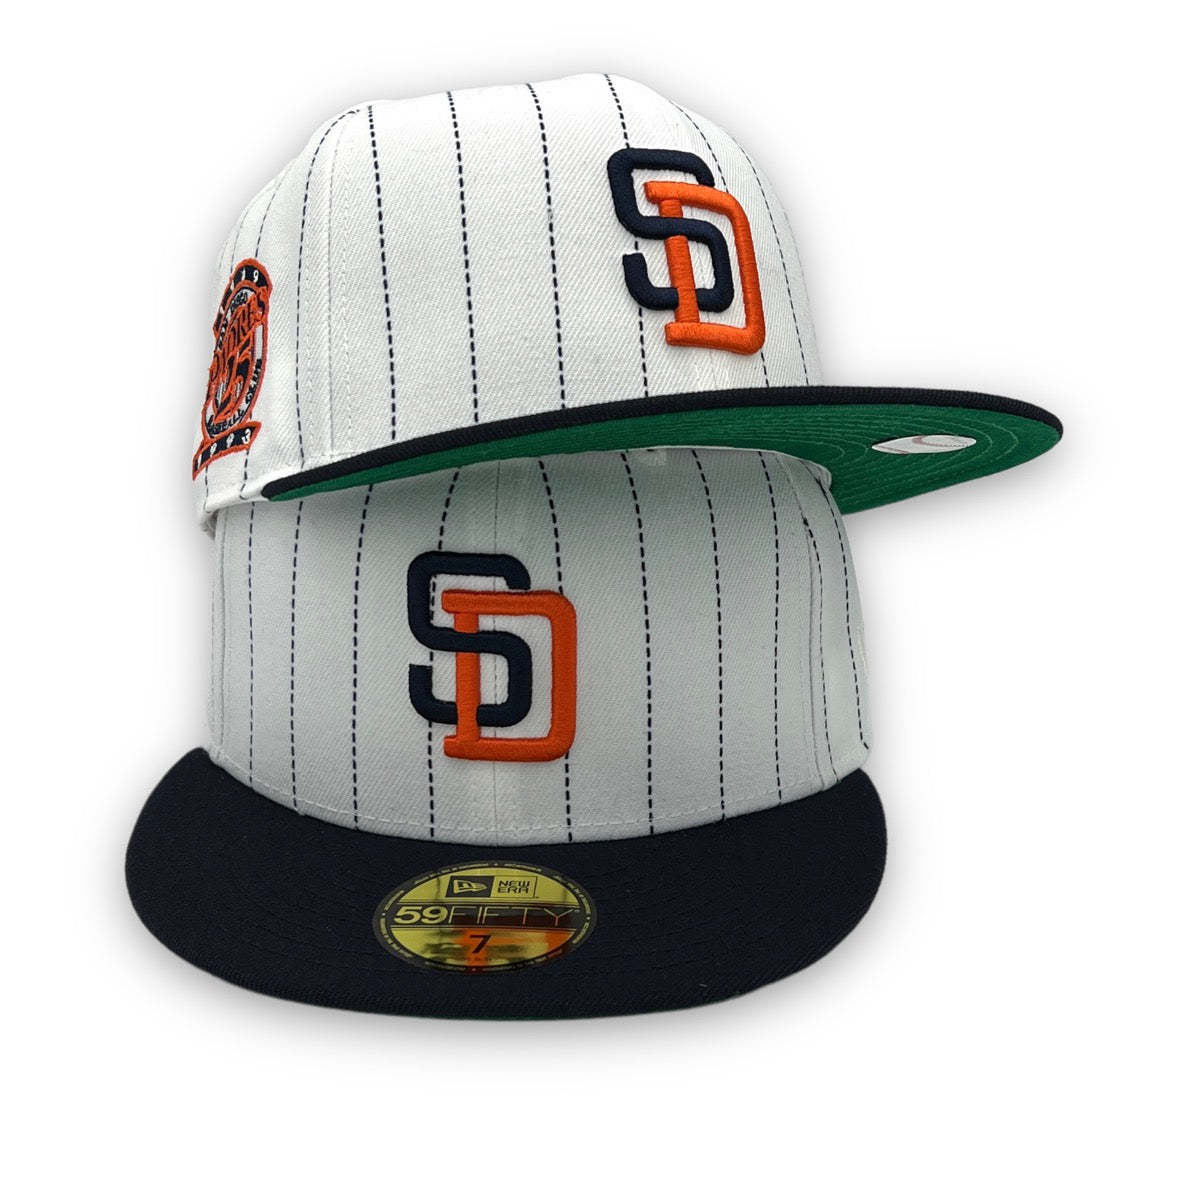 Men's New Era Navy San Diego Padres 25th Anniversary Cooperstown Collection  Team UV 59FIFTY Fitted Hat